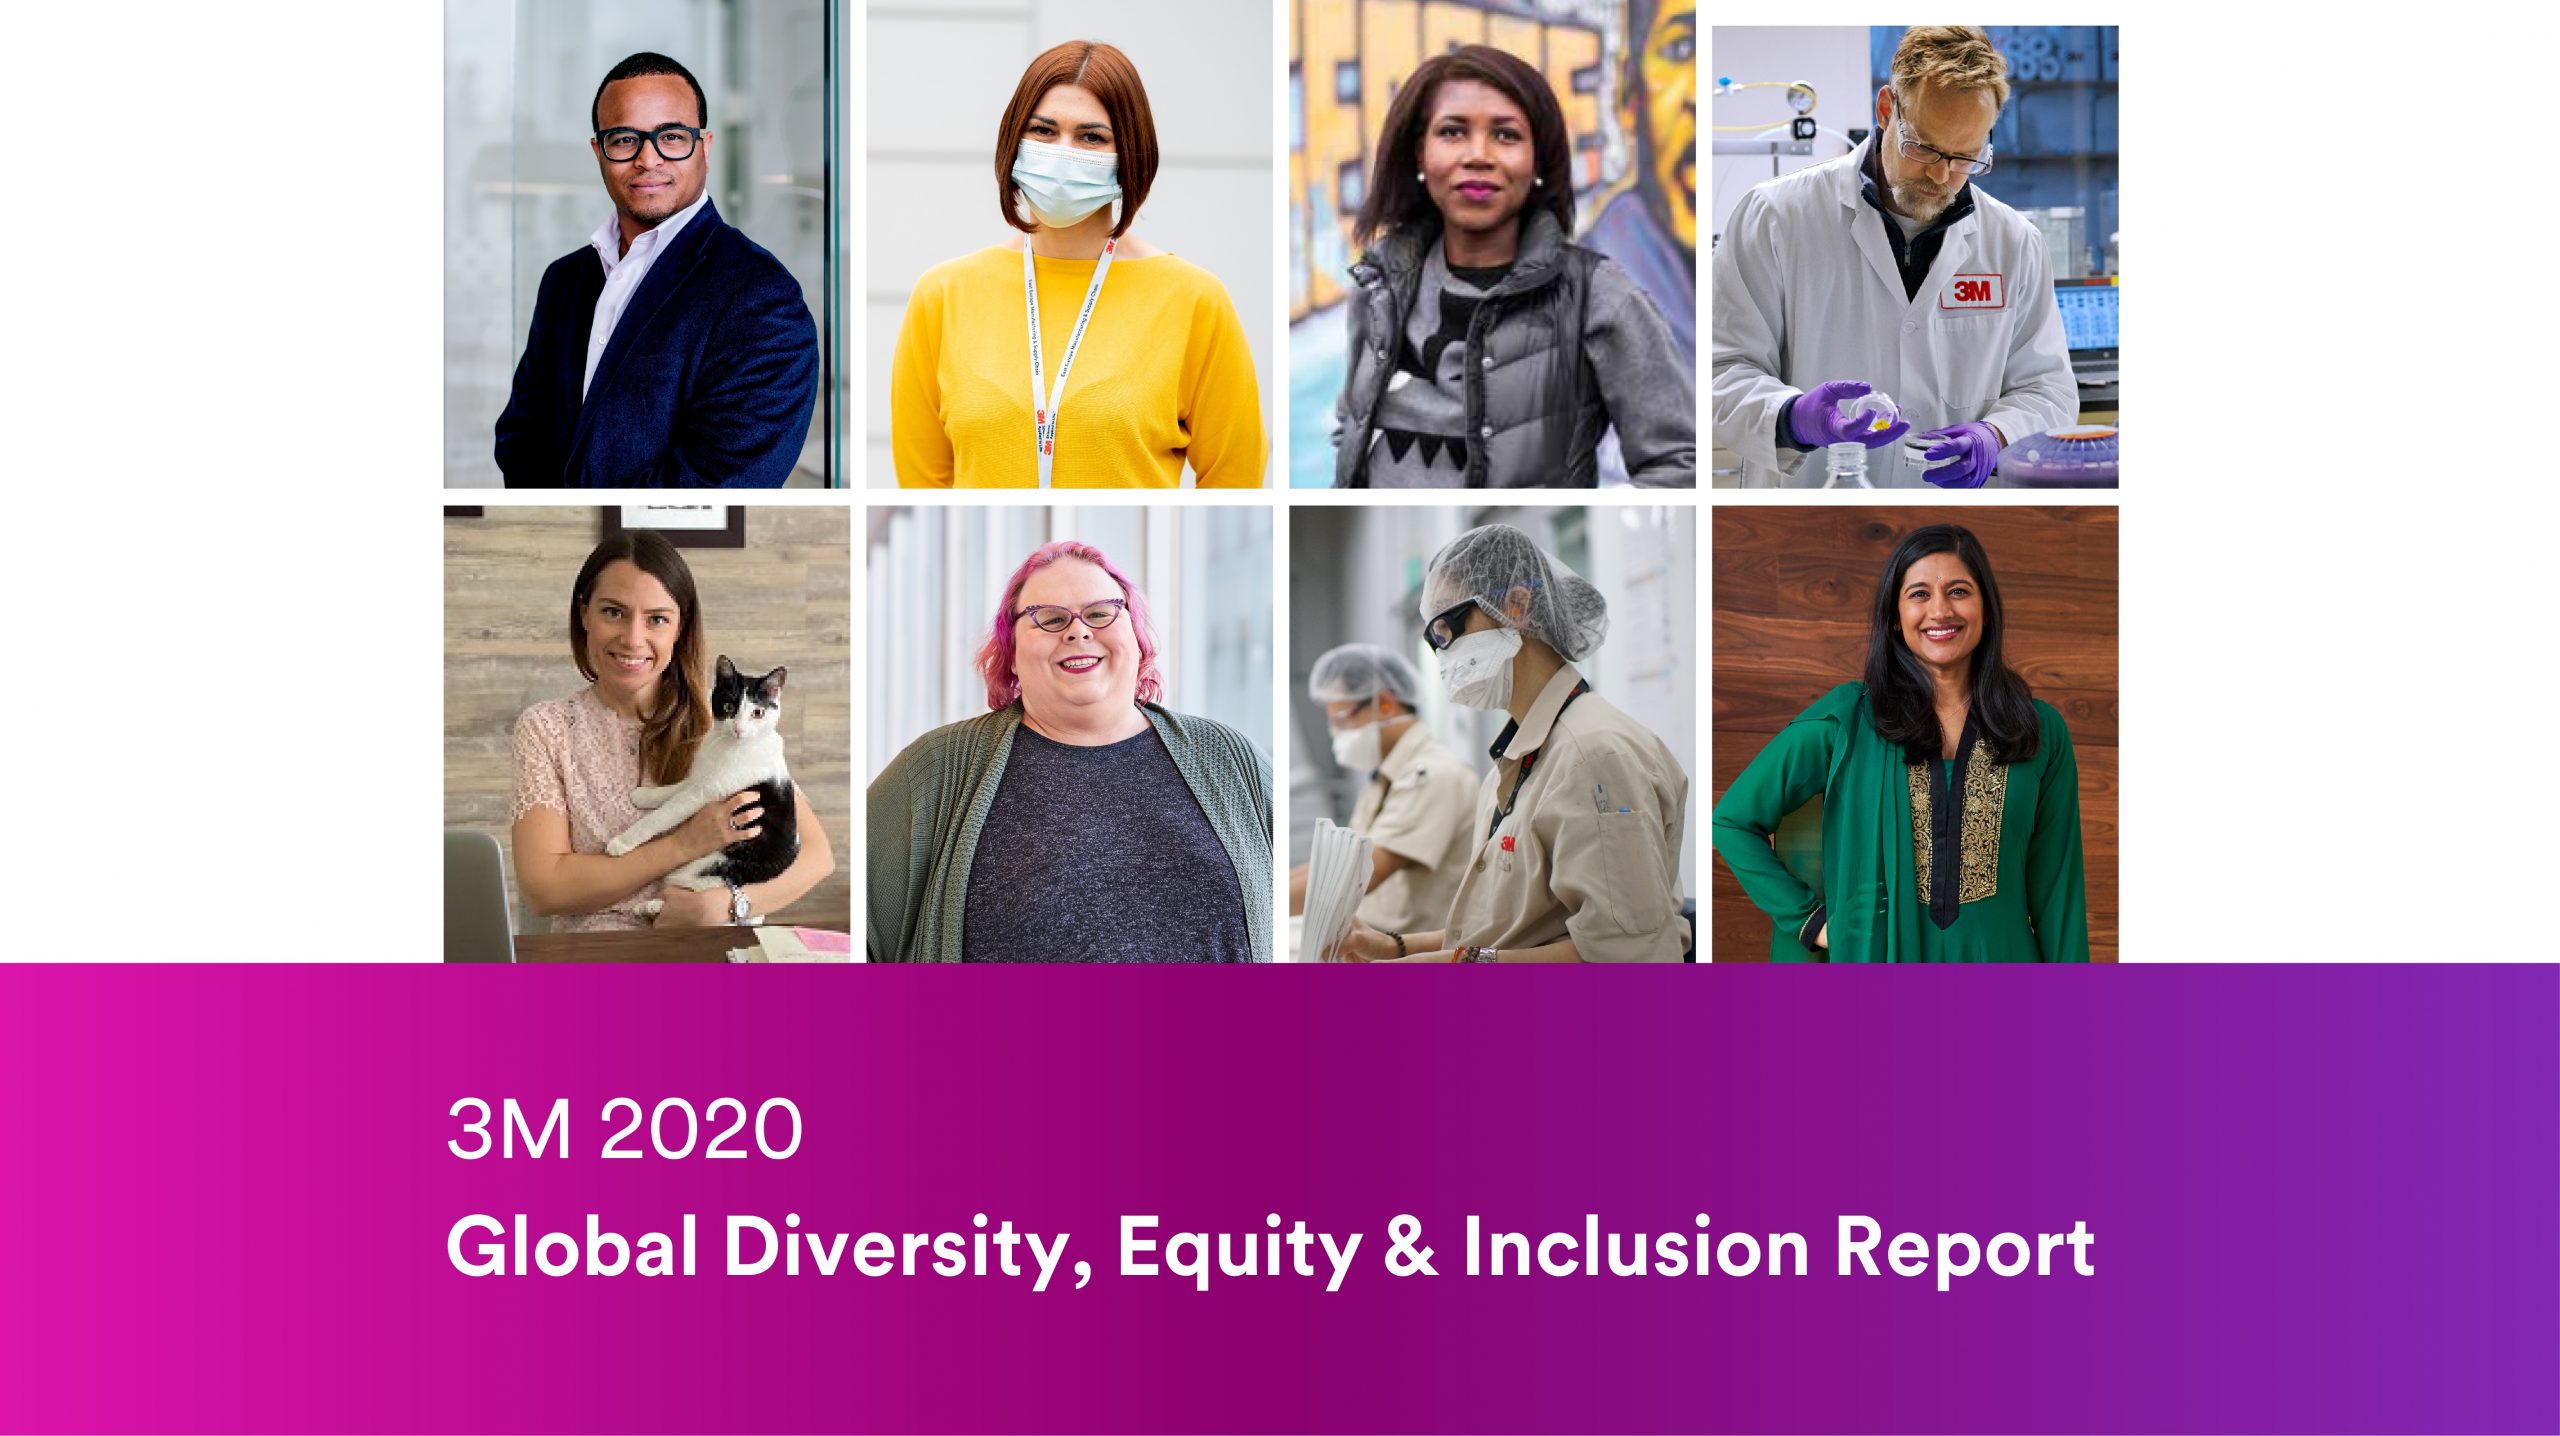 Diversity, Equity & Inclusion Report